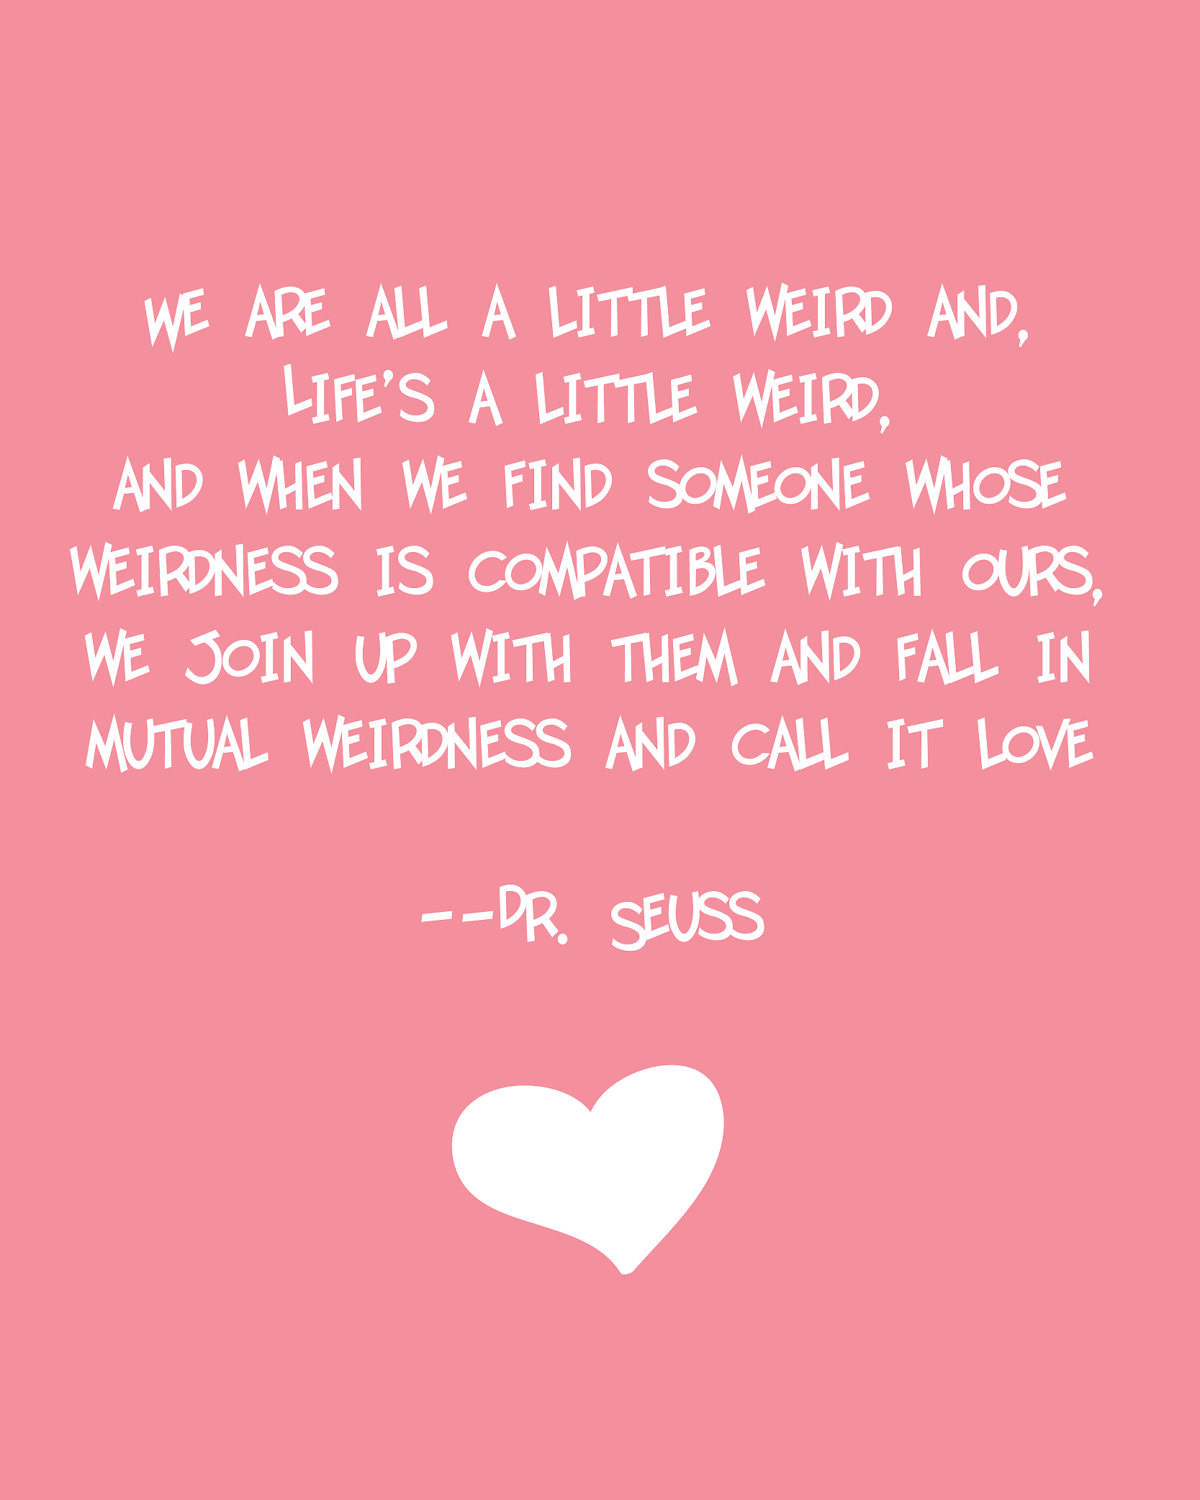 Dr Seuss Quotes Love
 Items similar to Dr Seuss Weird Love Quote Pink on Etsy